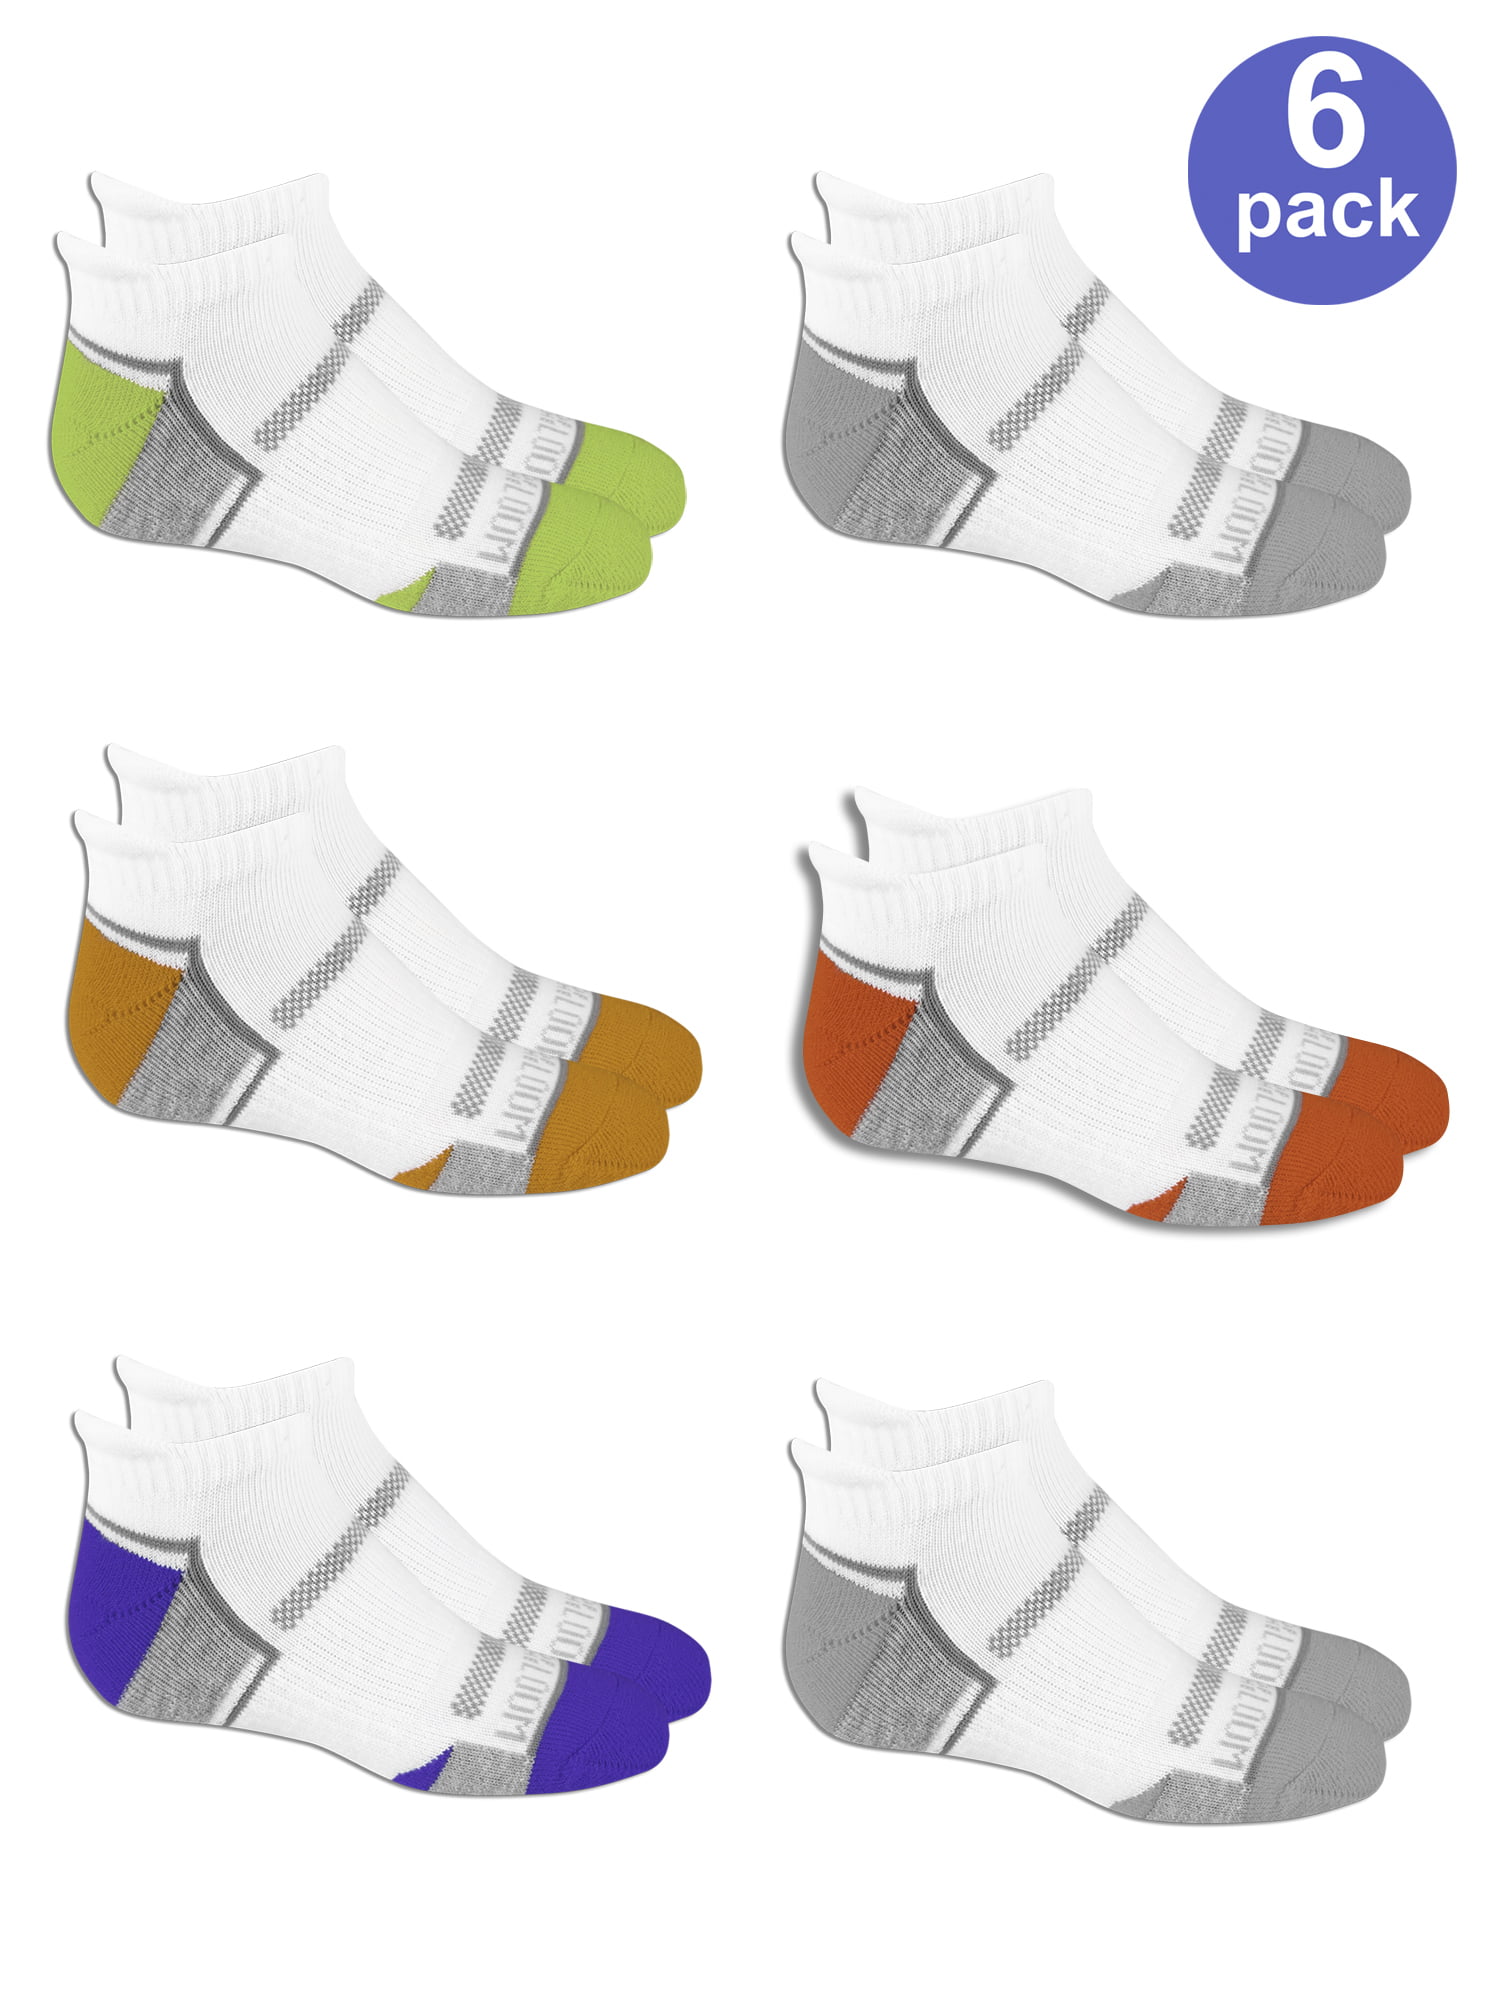 6 Pair Pack New Fruit of the Loom Boy's Active Ankle Socks